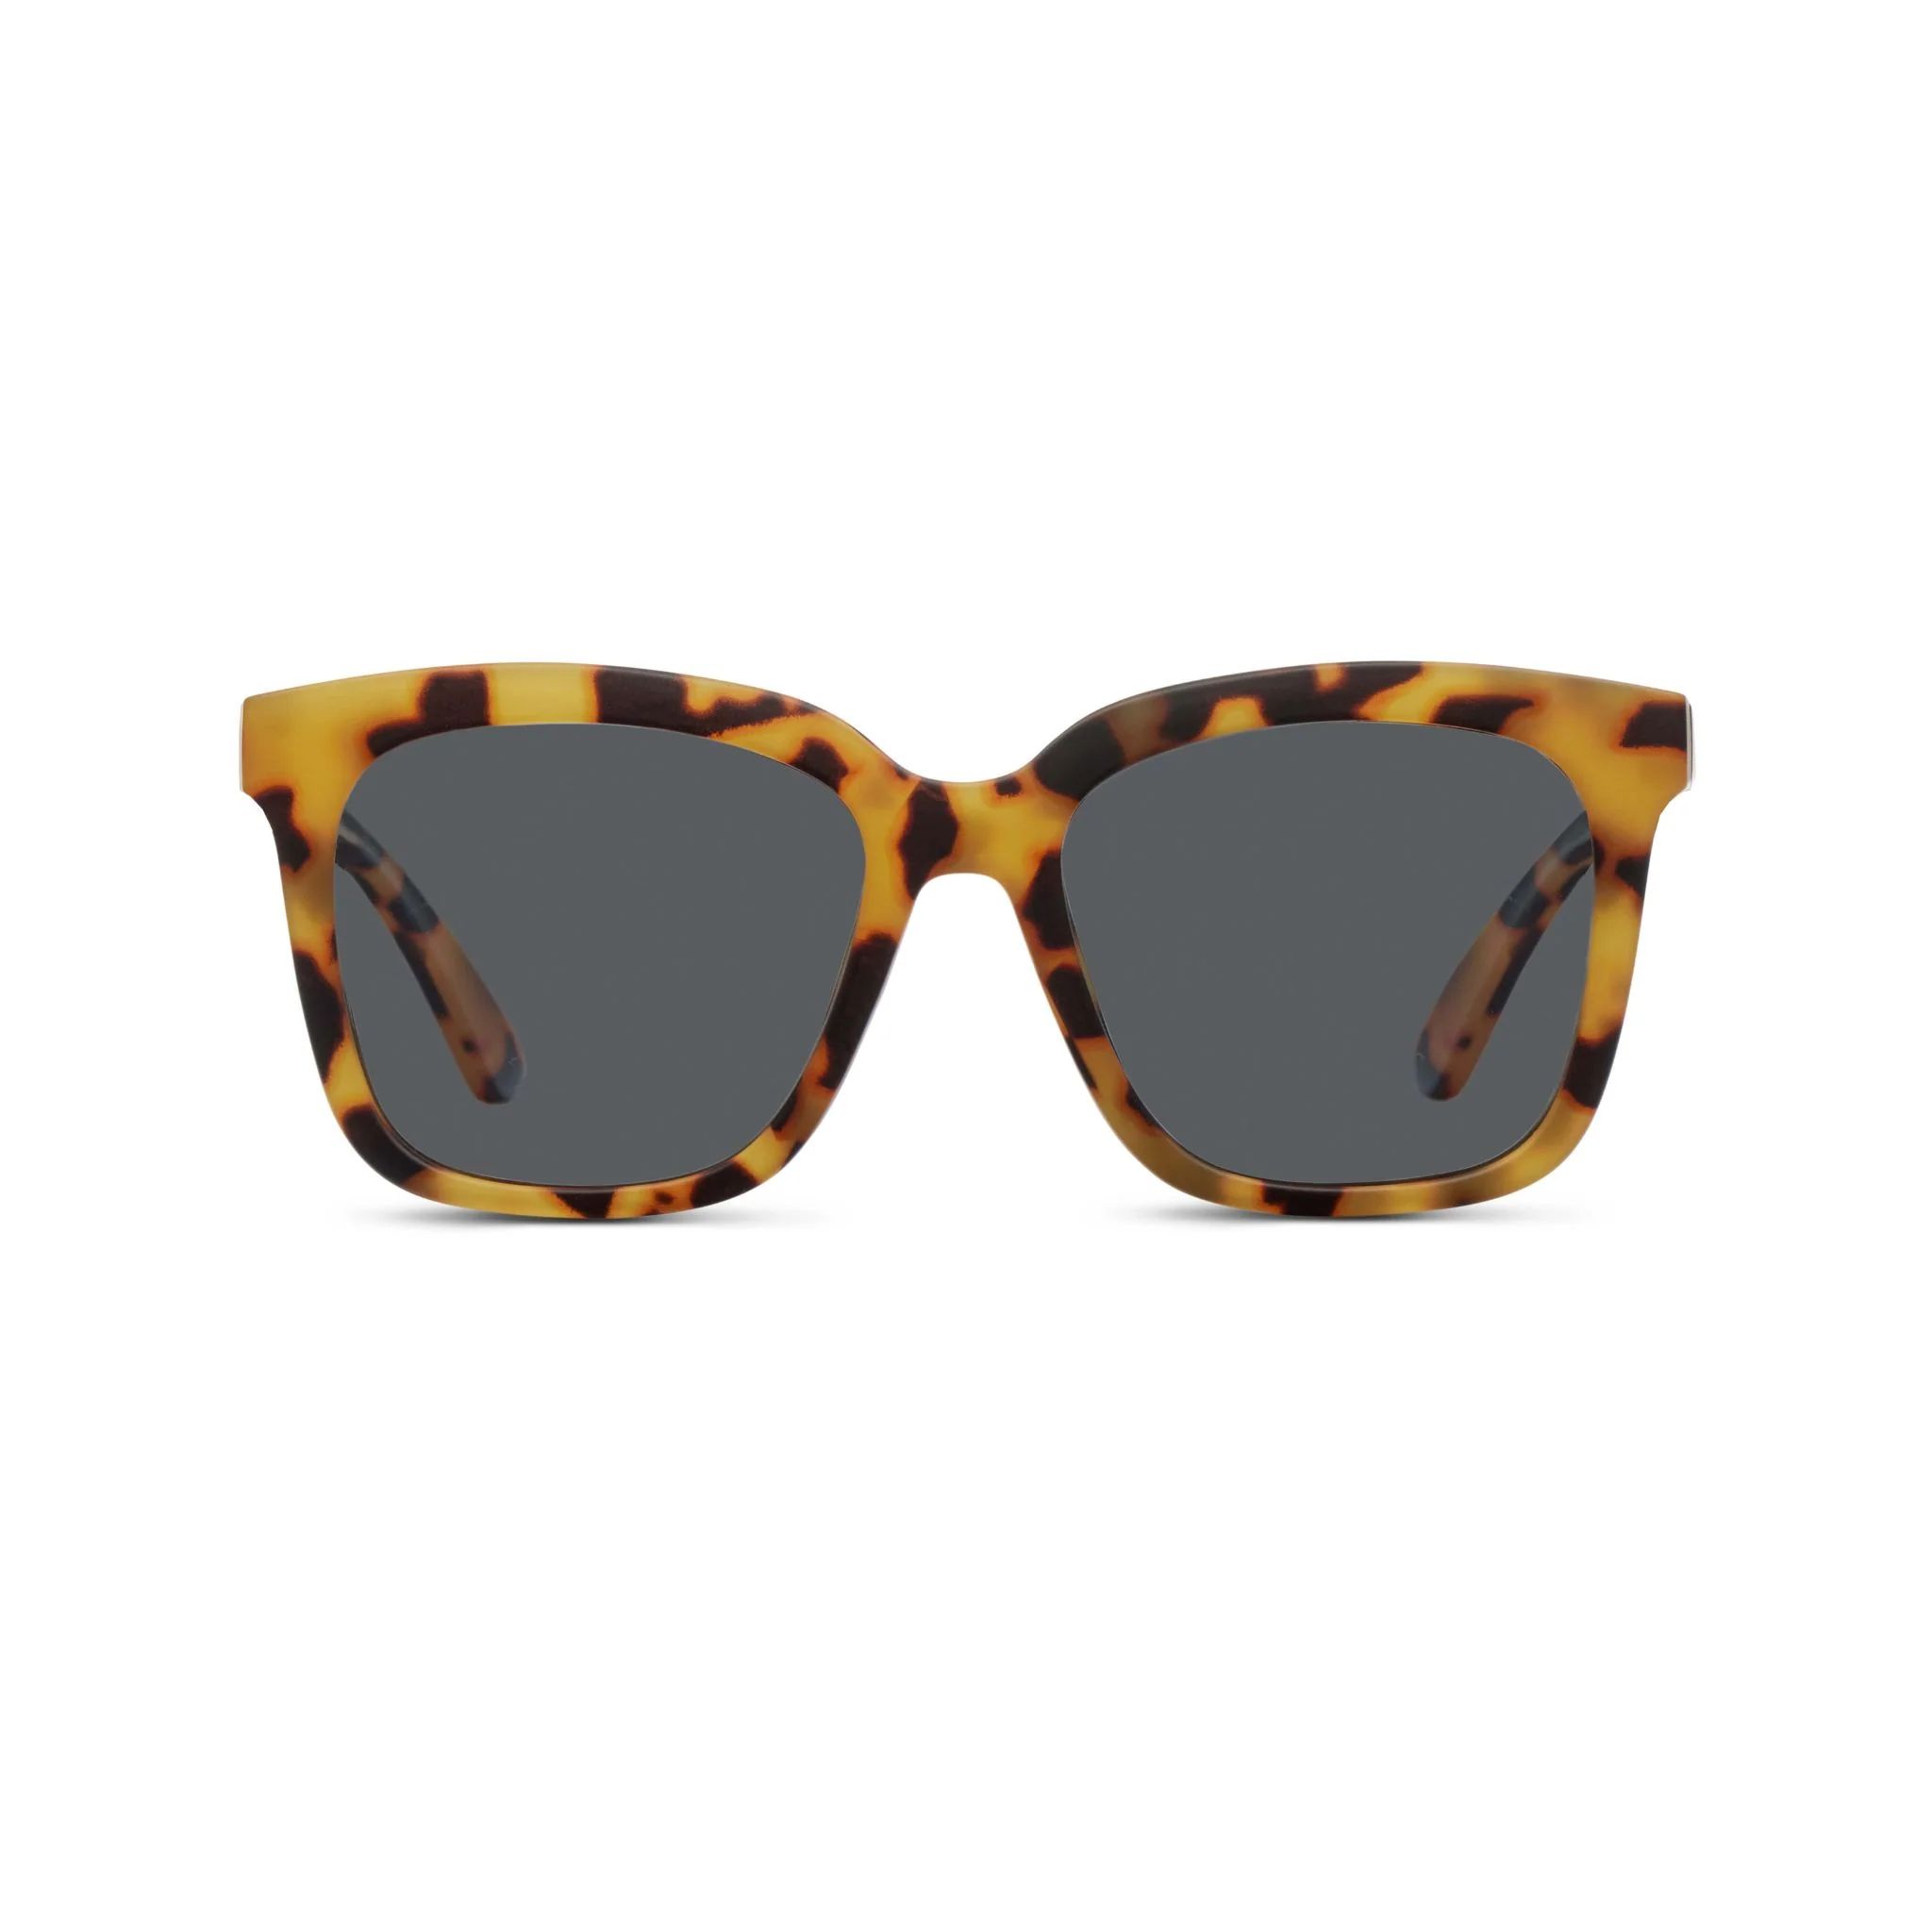 First Class (Sunglasses) - Peepers by PeeperSpecs | Peepers